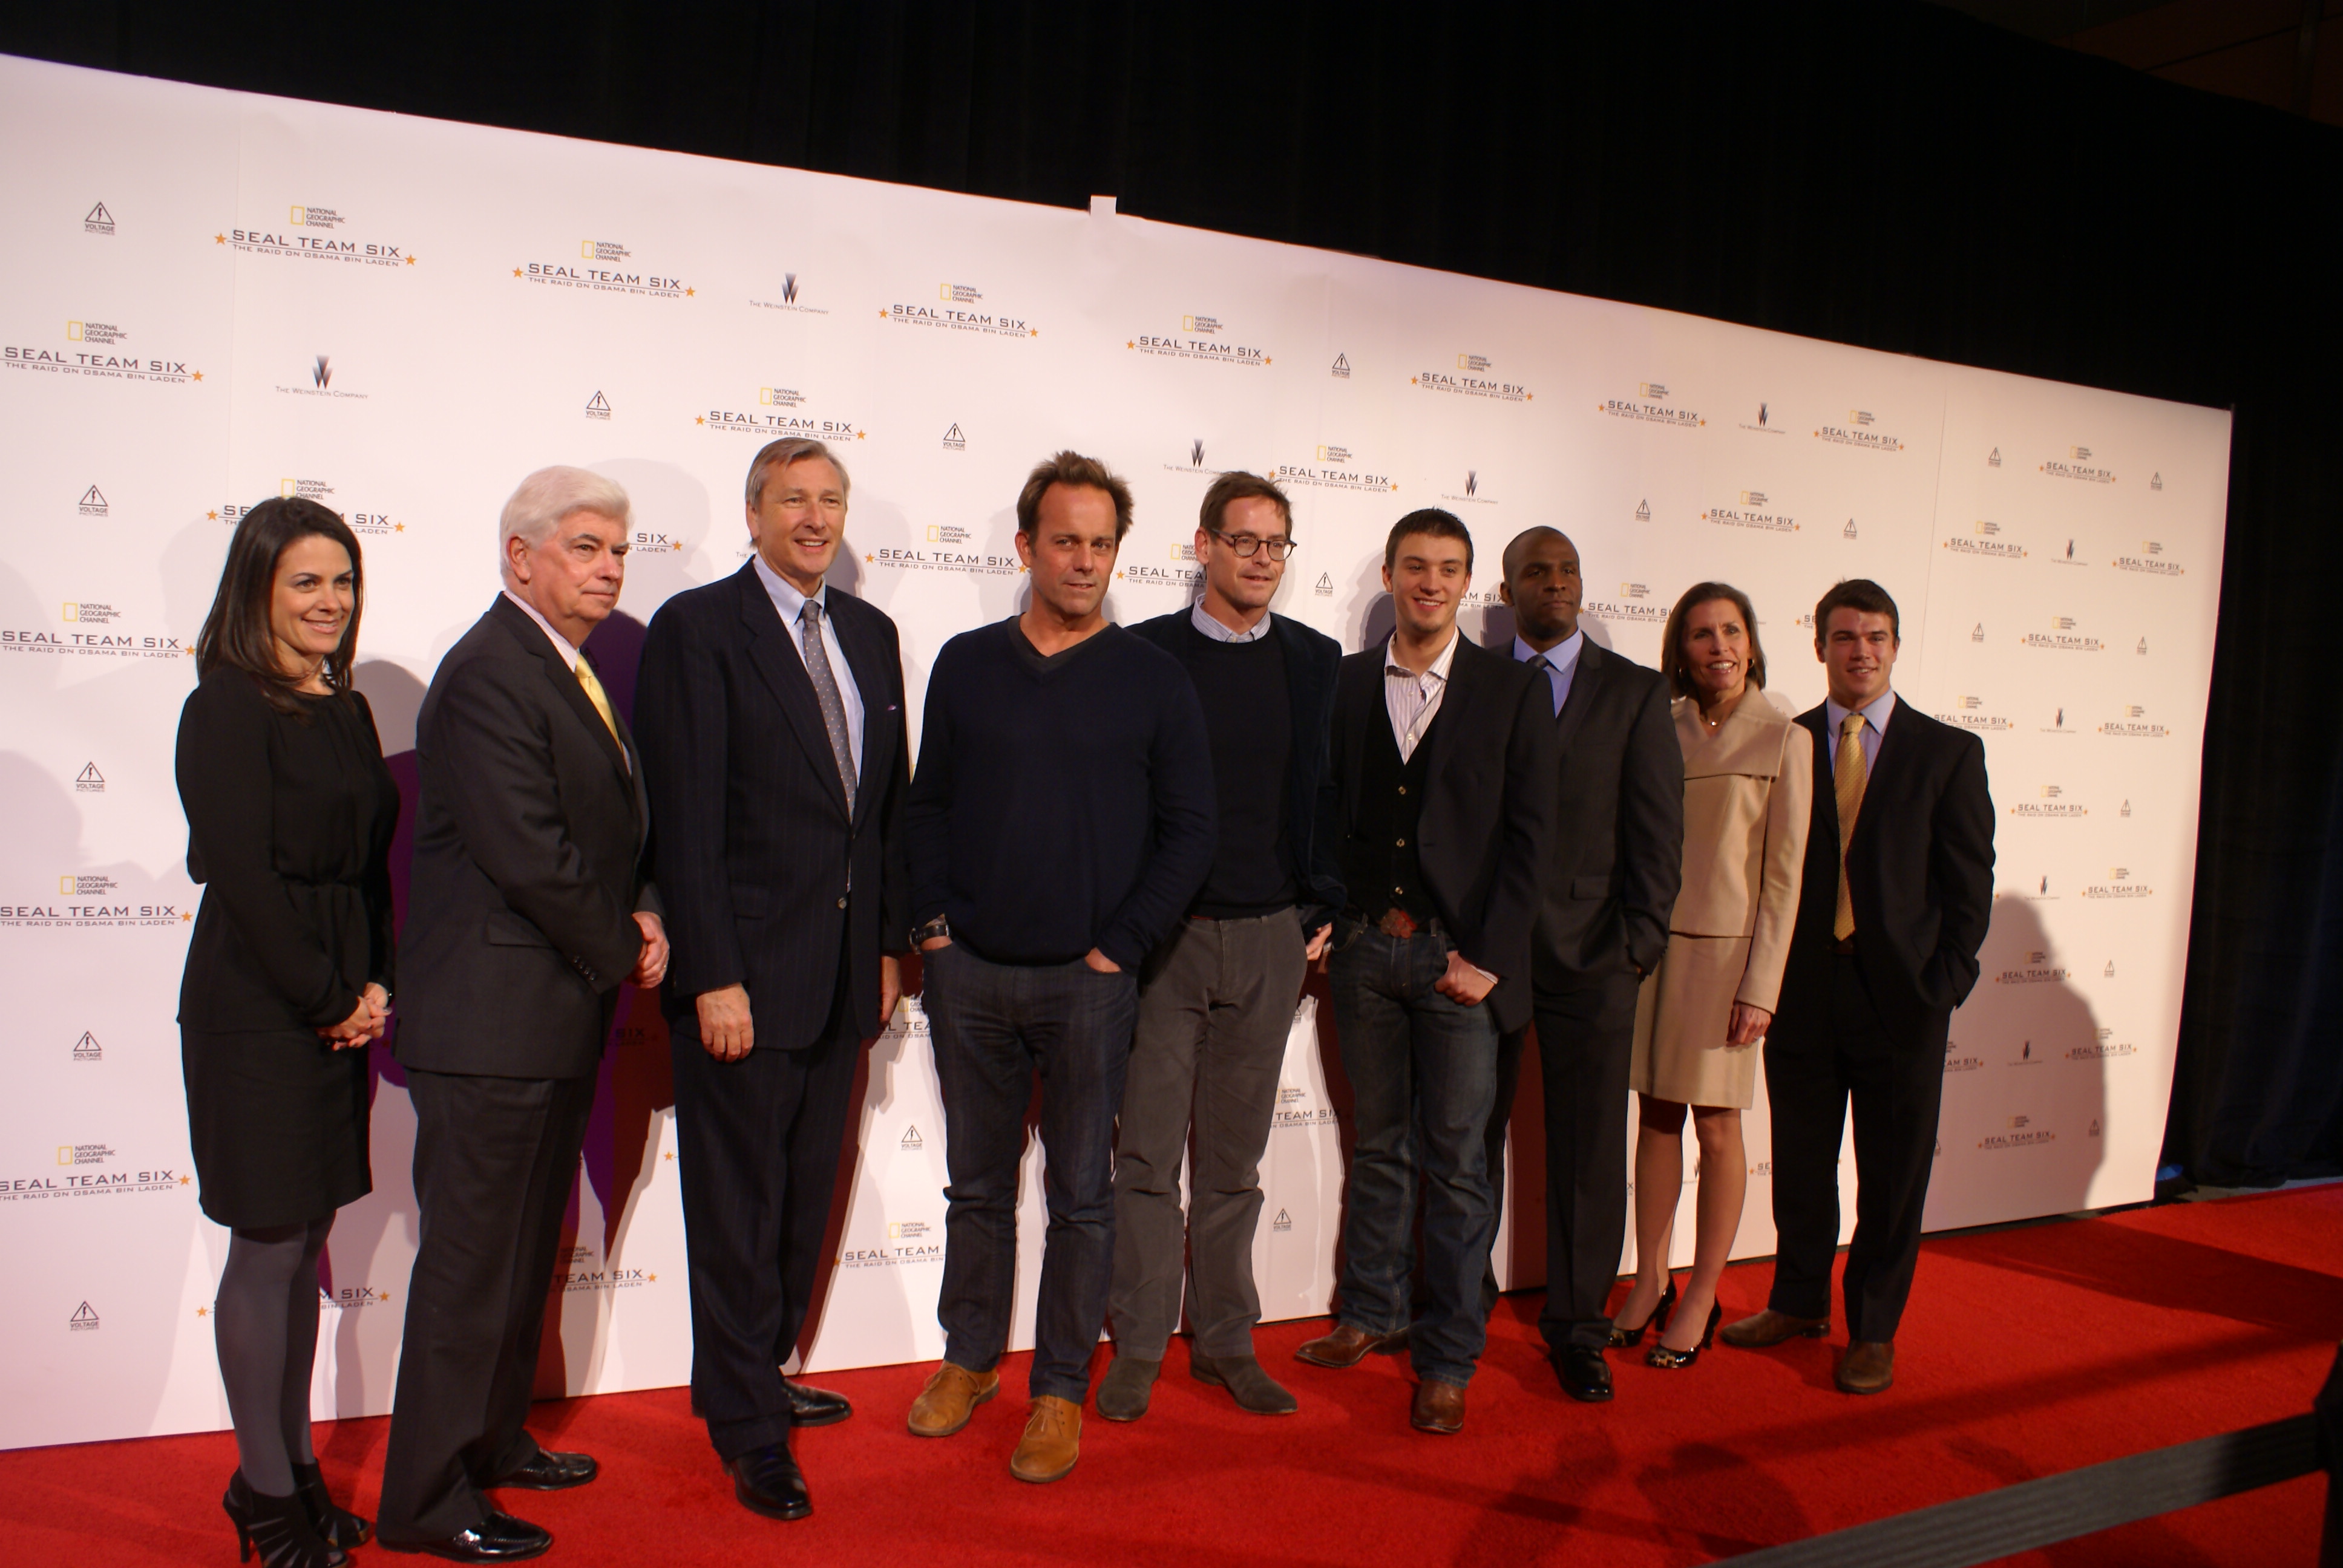 NatGeo’s SEAL TEAM SIX Has ‘Untraditional Hollywood’ Premiere at Newseum